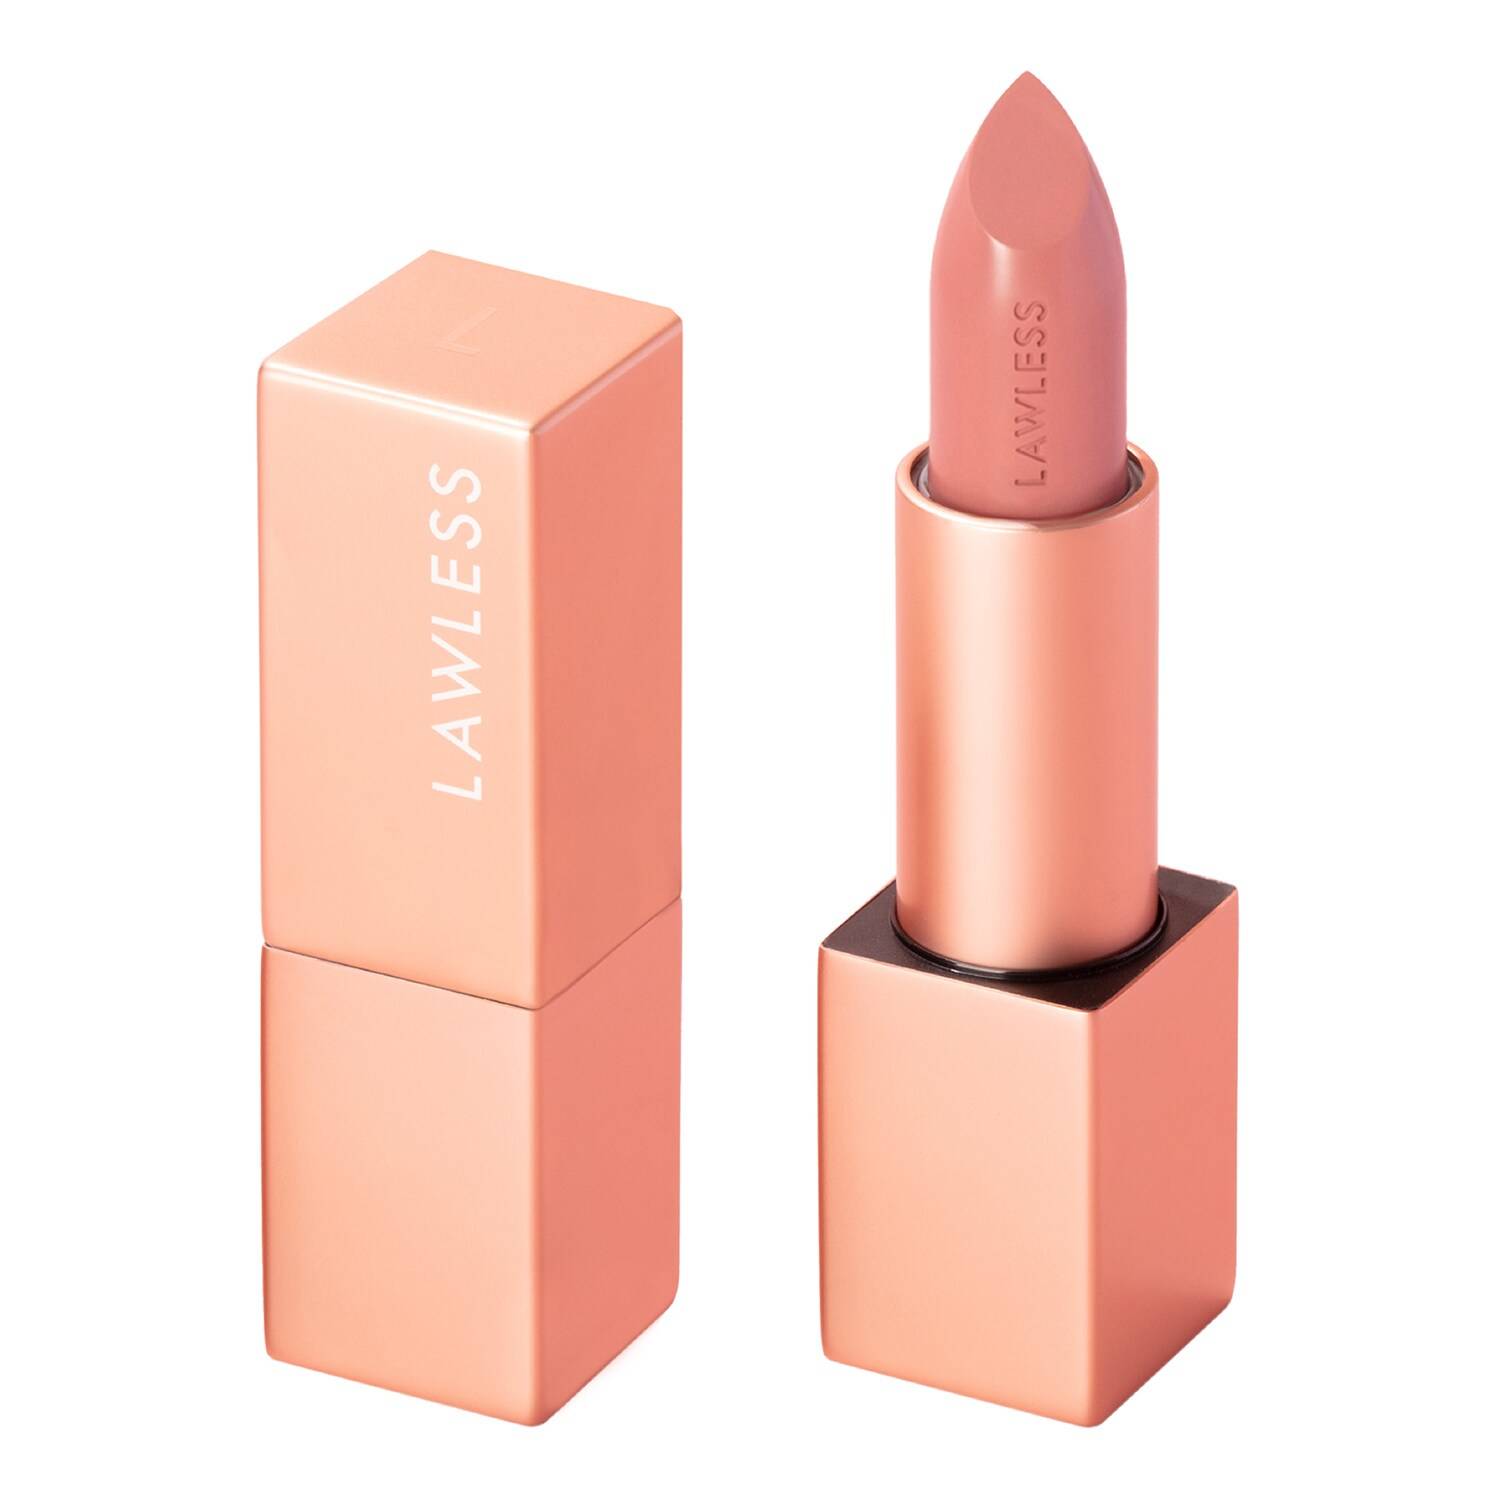 Lawless Beauty Forget The Filler Lip Plumping Line-Smoothing Satin Cream Lipstick 3.7G Daisy Girl